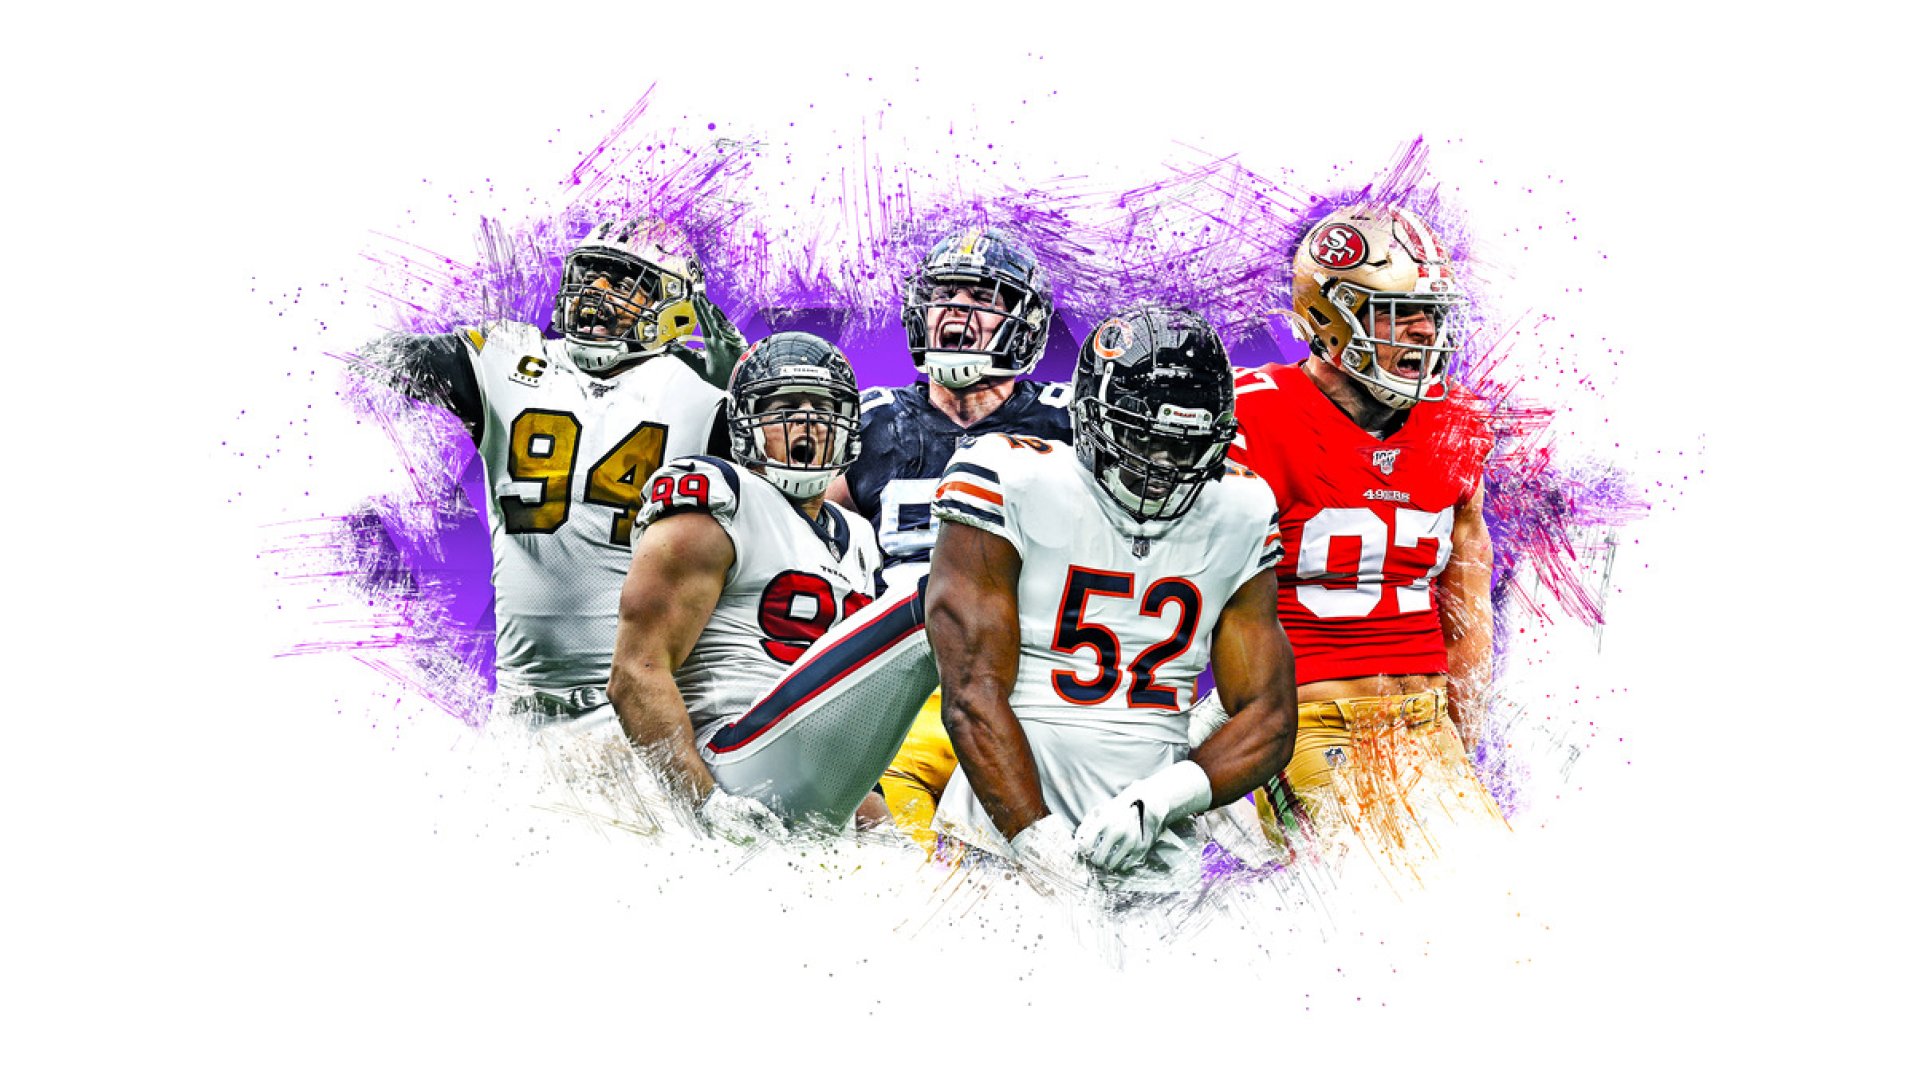 PFF Rankings The NFL's top 25 edge defenders ahead of the 2020 NFL